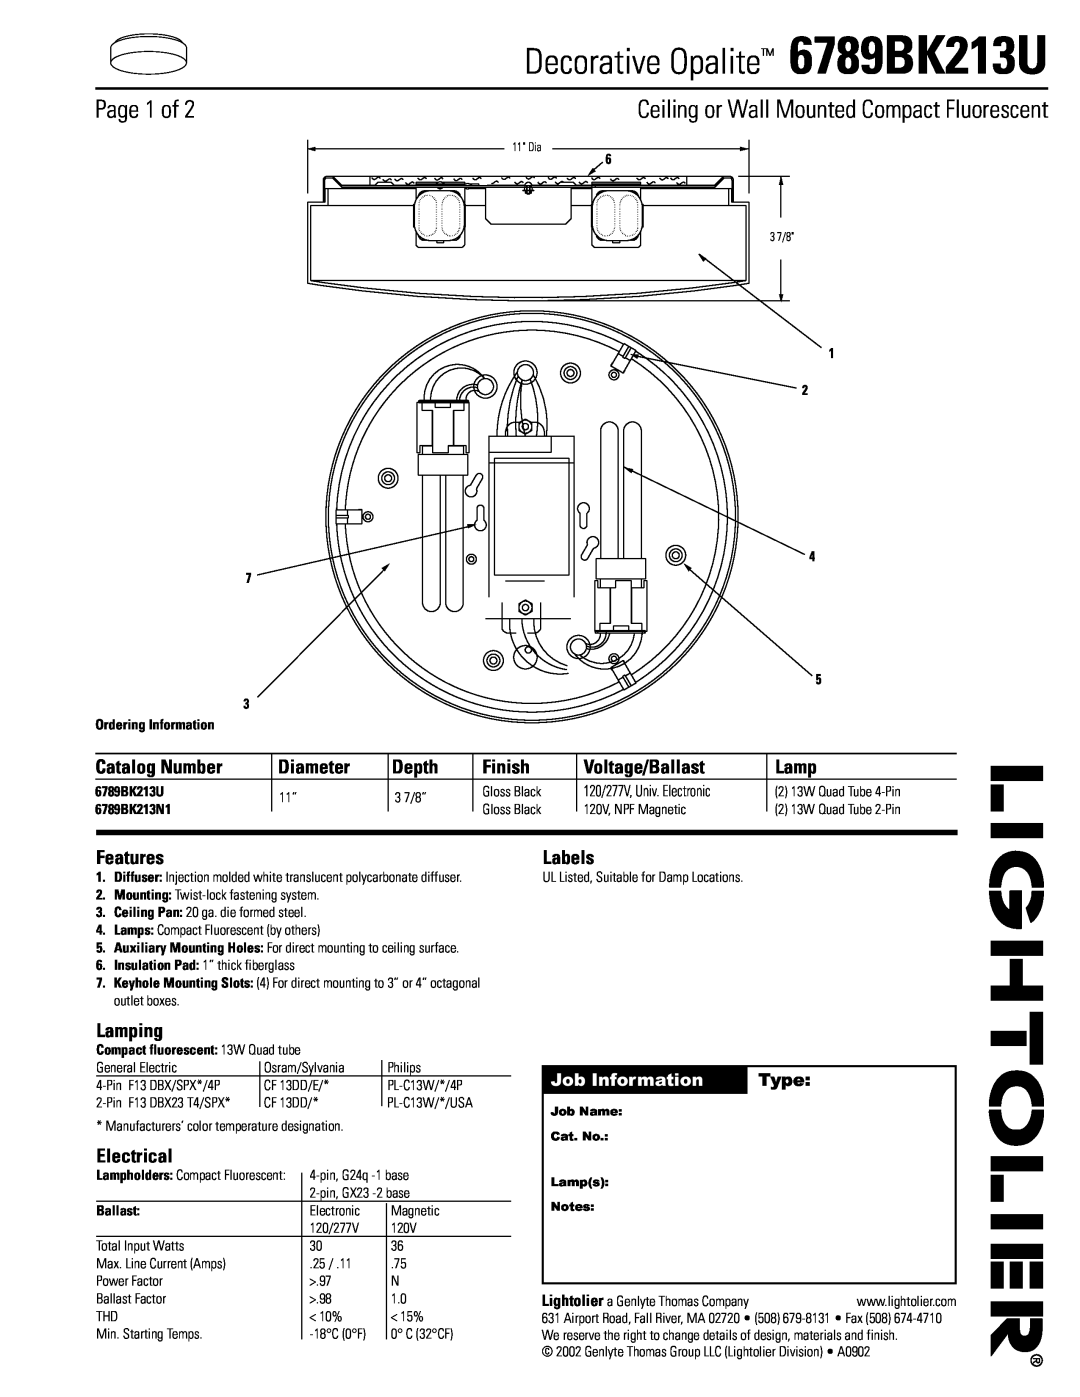 Lightolier manual Page 1 of, Ceiling or Wall Mounted Compact Fluorescent, Decorative Opalite 6789BK213U, Catalog Number 